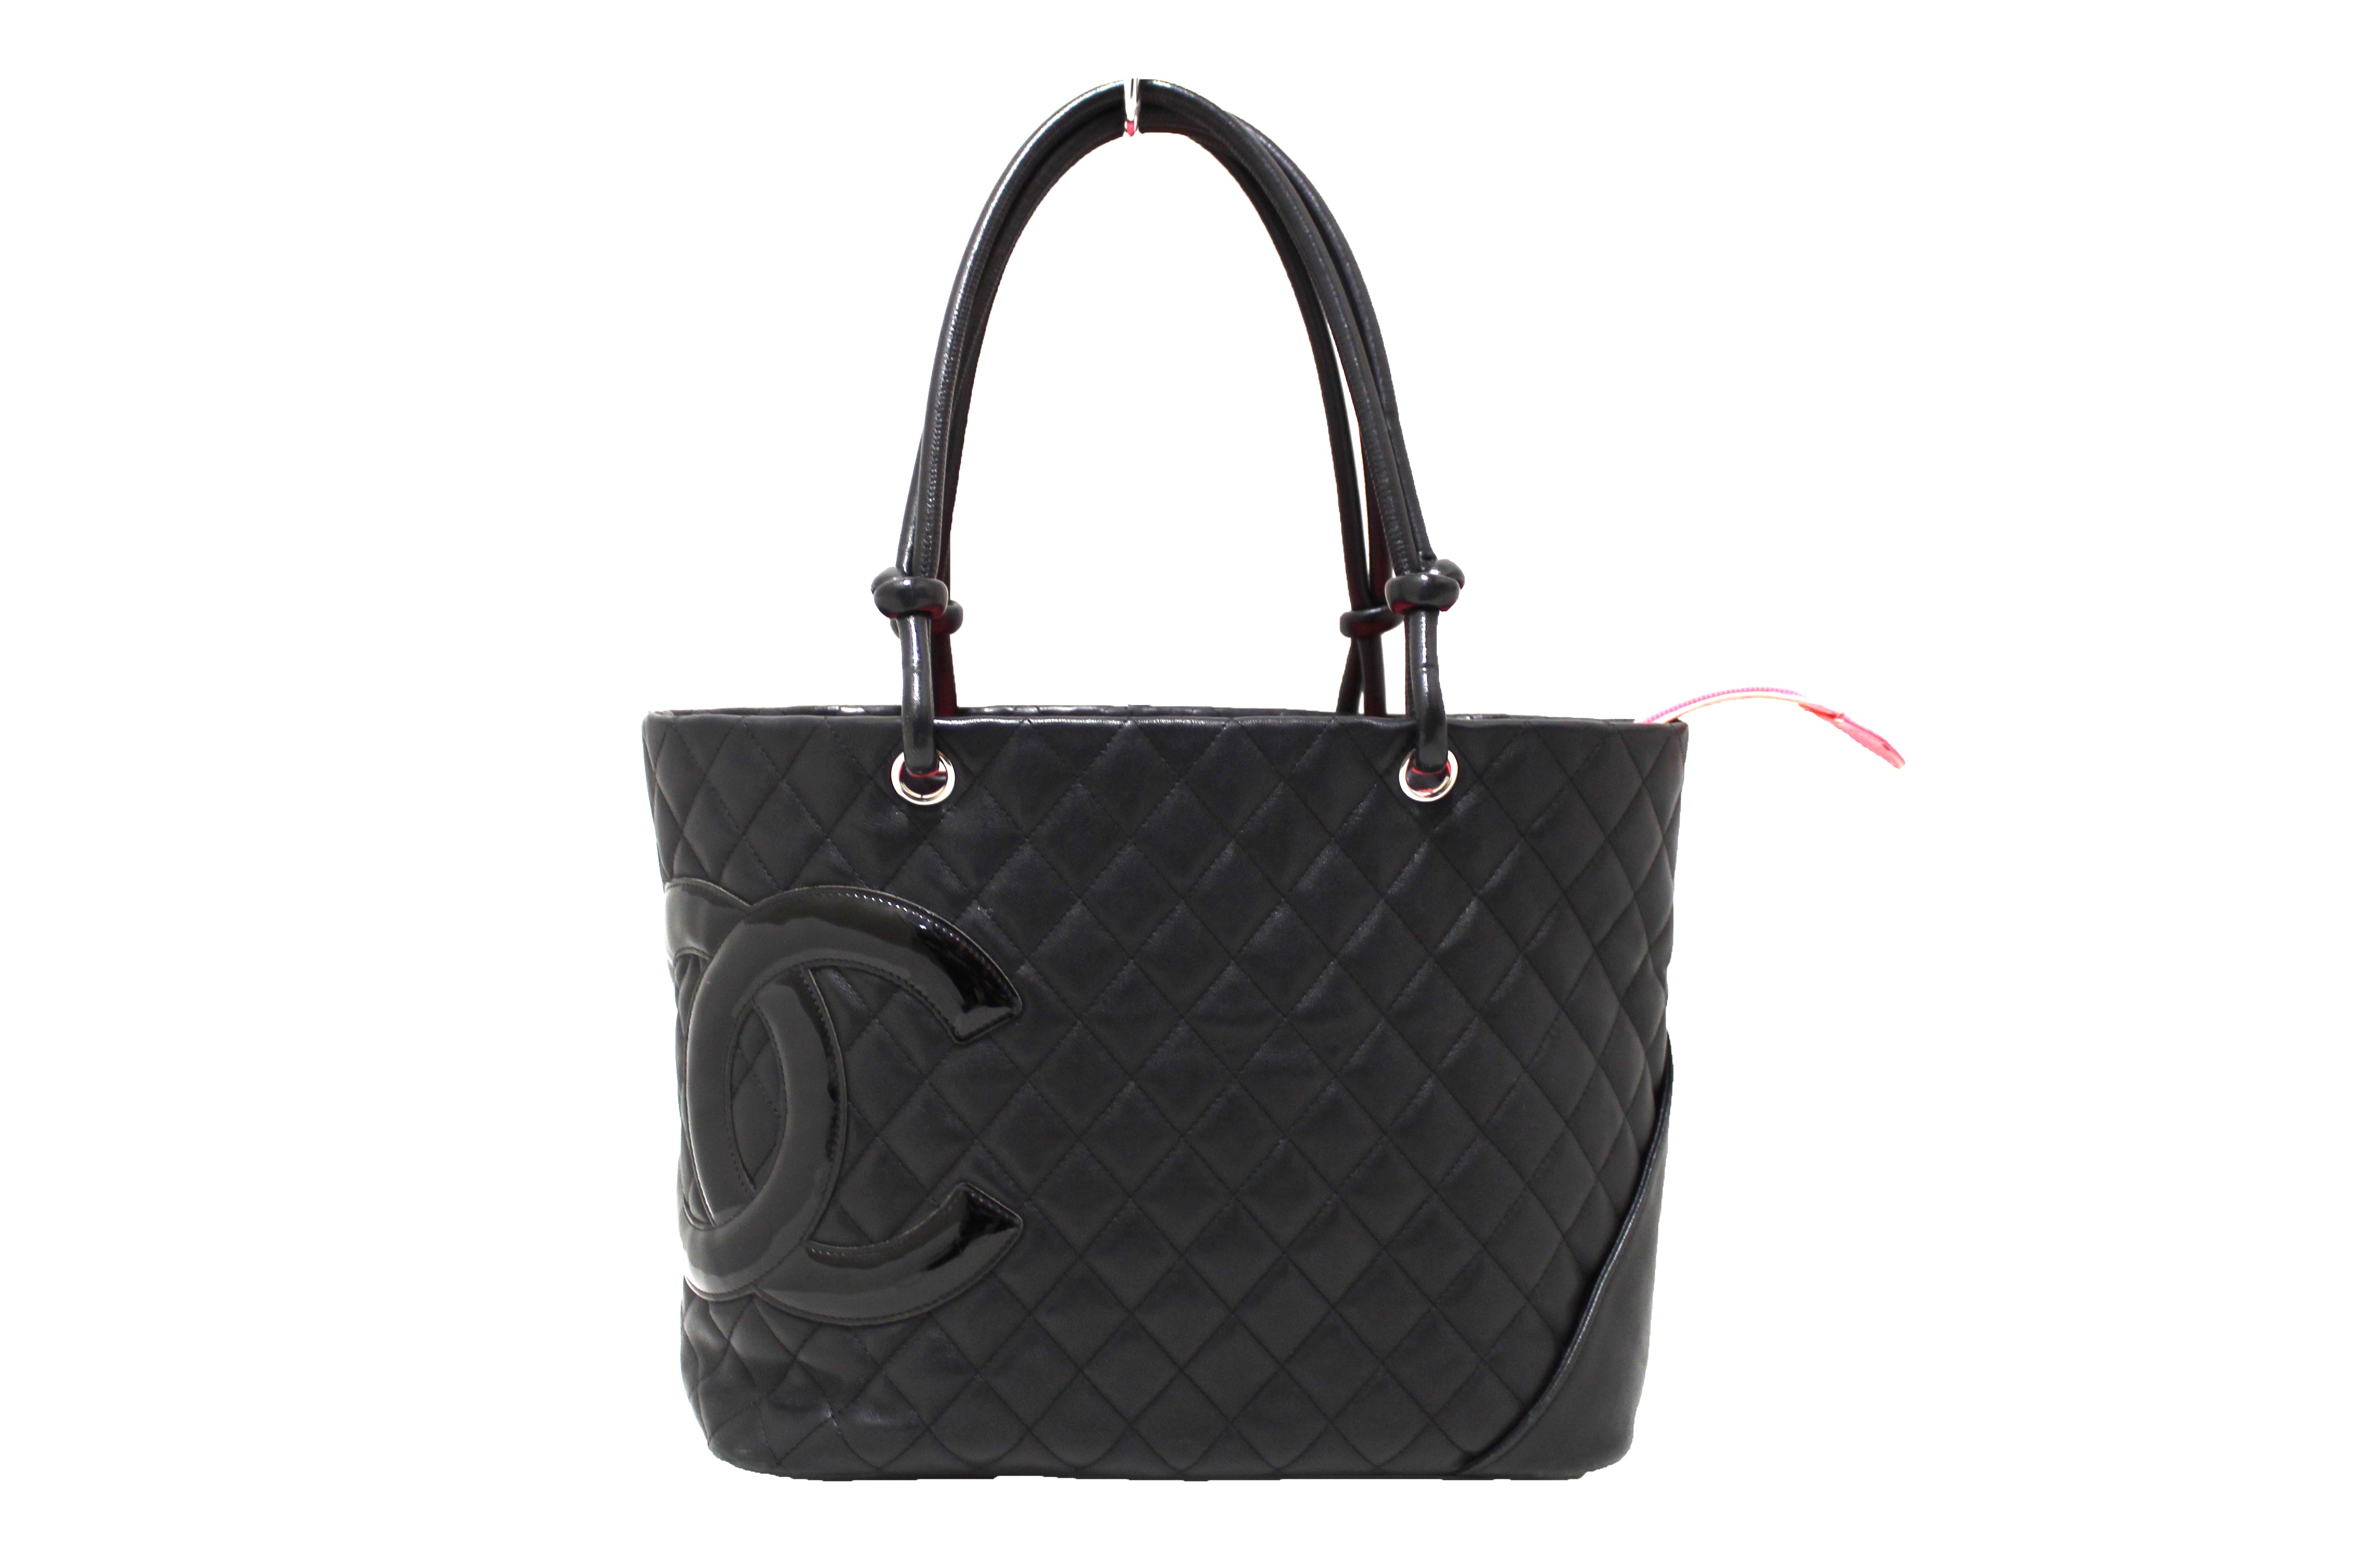 Authentic Chanel Black Quilted Calfskin Leather Large Cambon Tote Shou ...